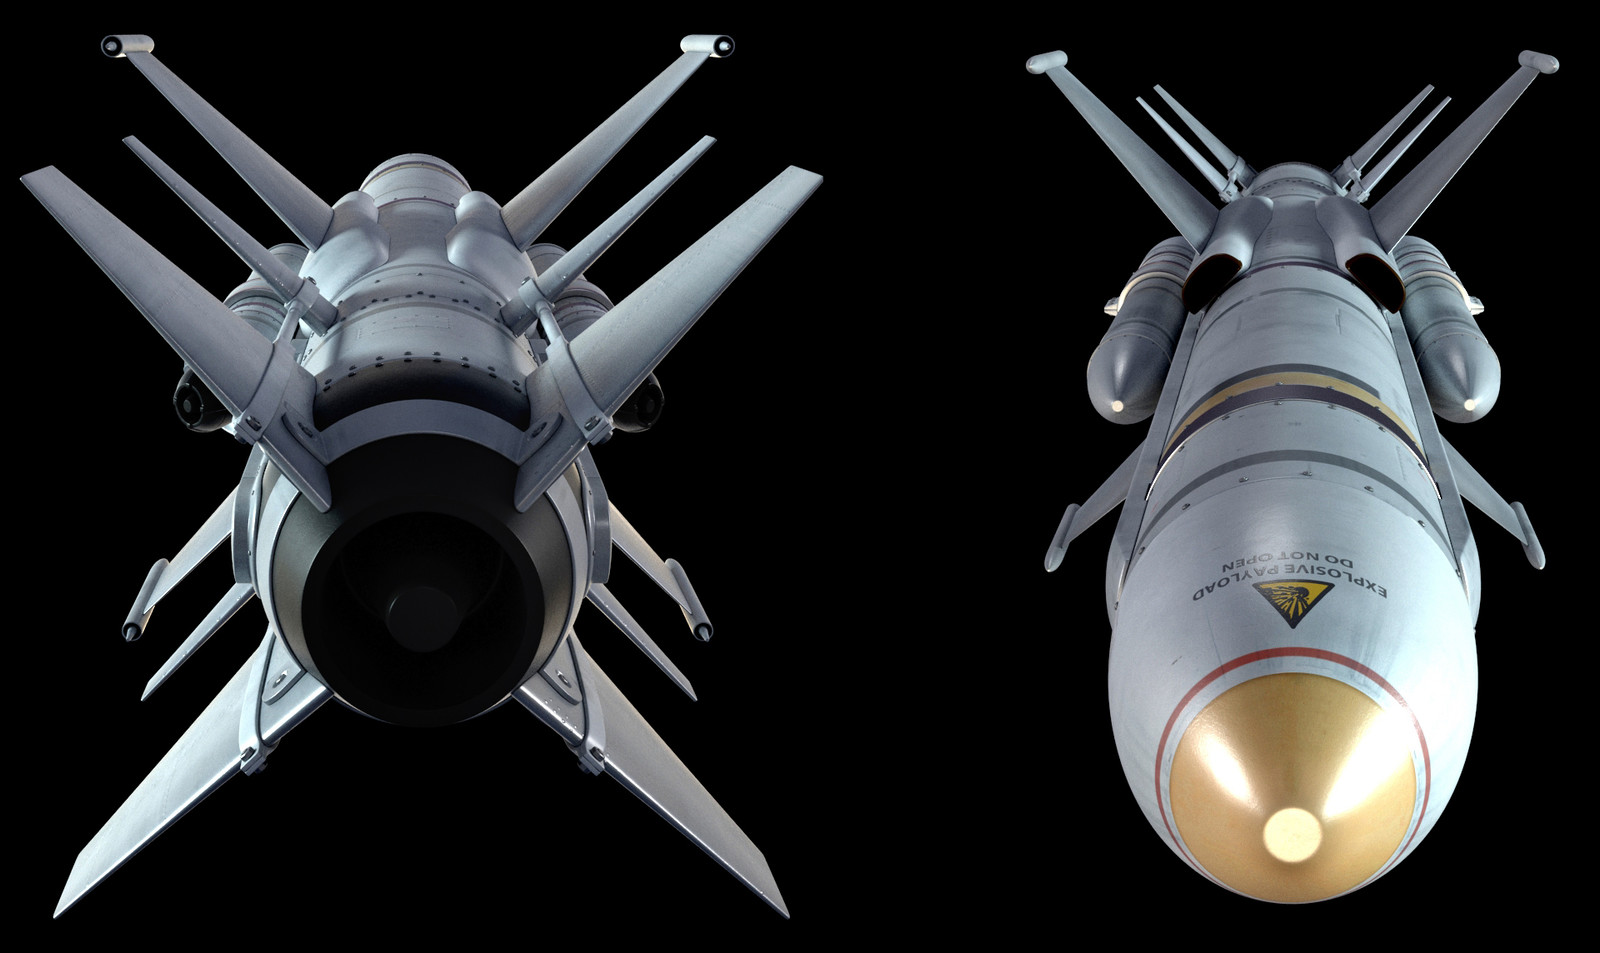 Back and front view.

Not an overly difficult or complex model, but it was a lot of fun to be able to make a quick rocket.